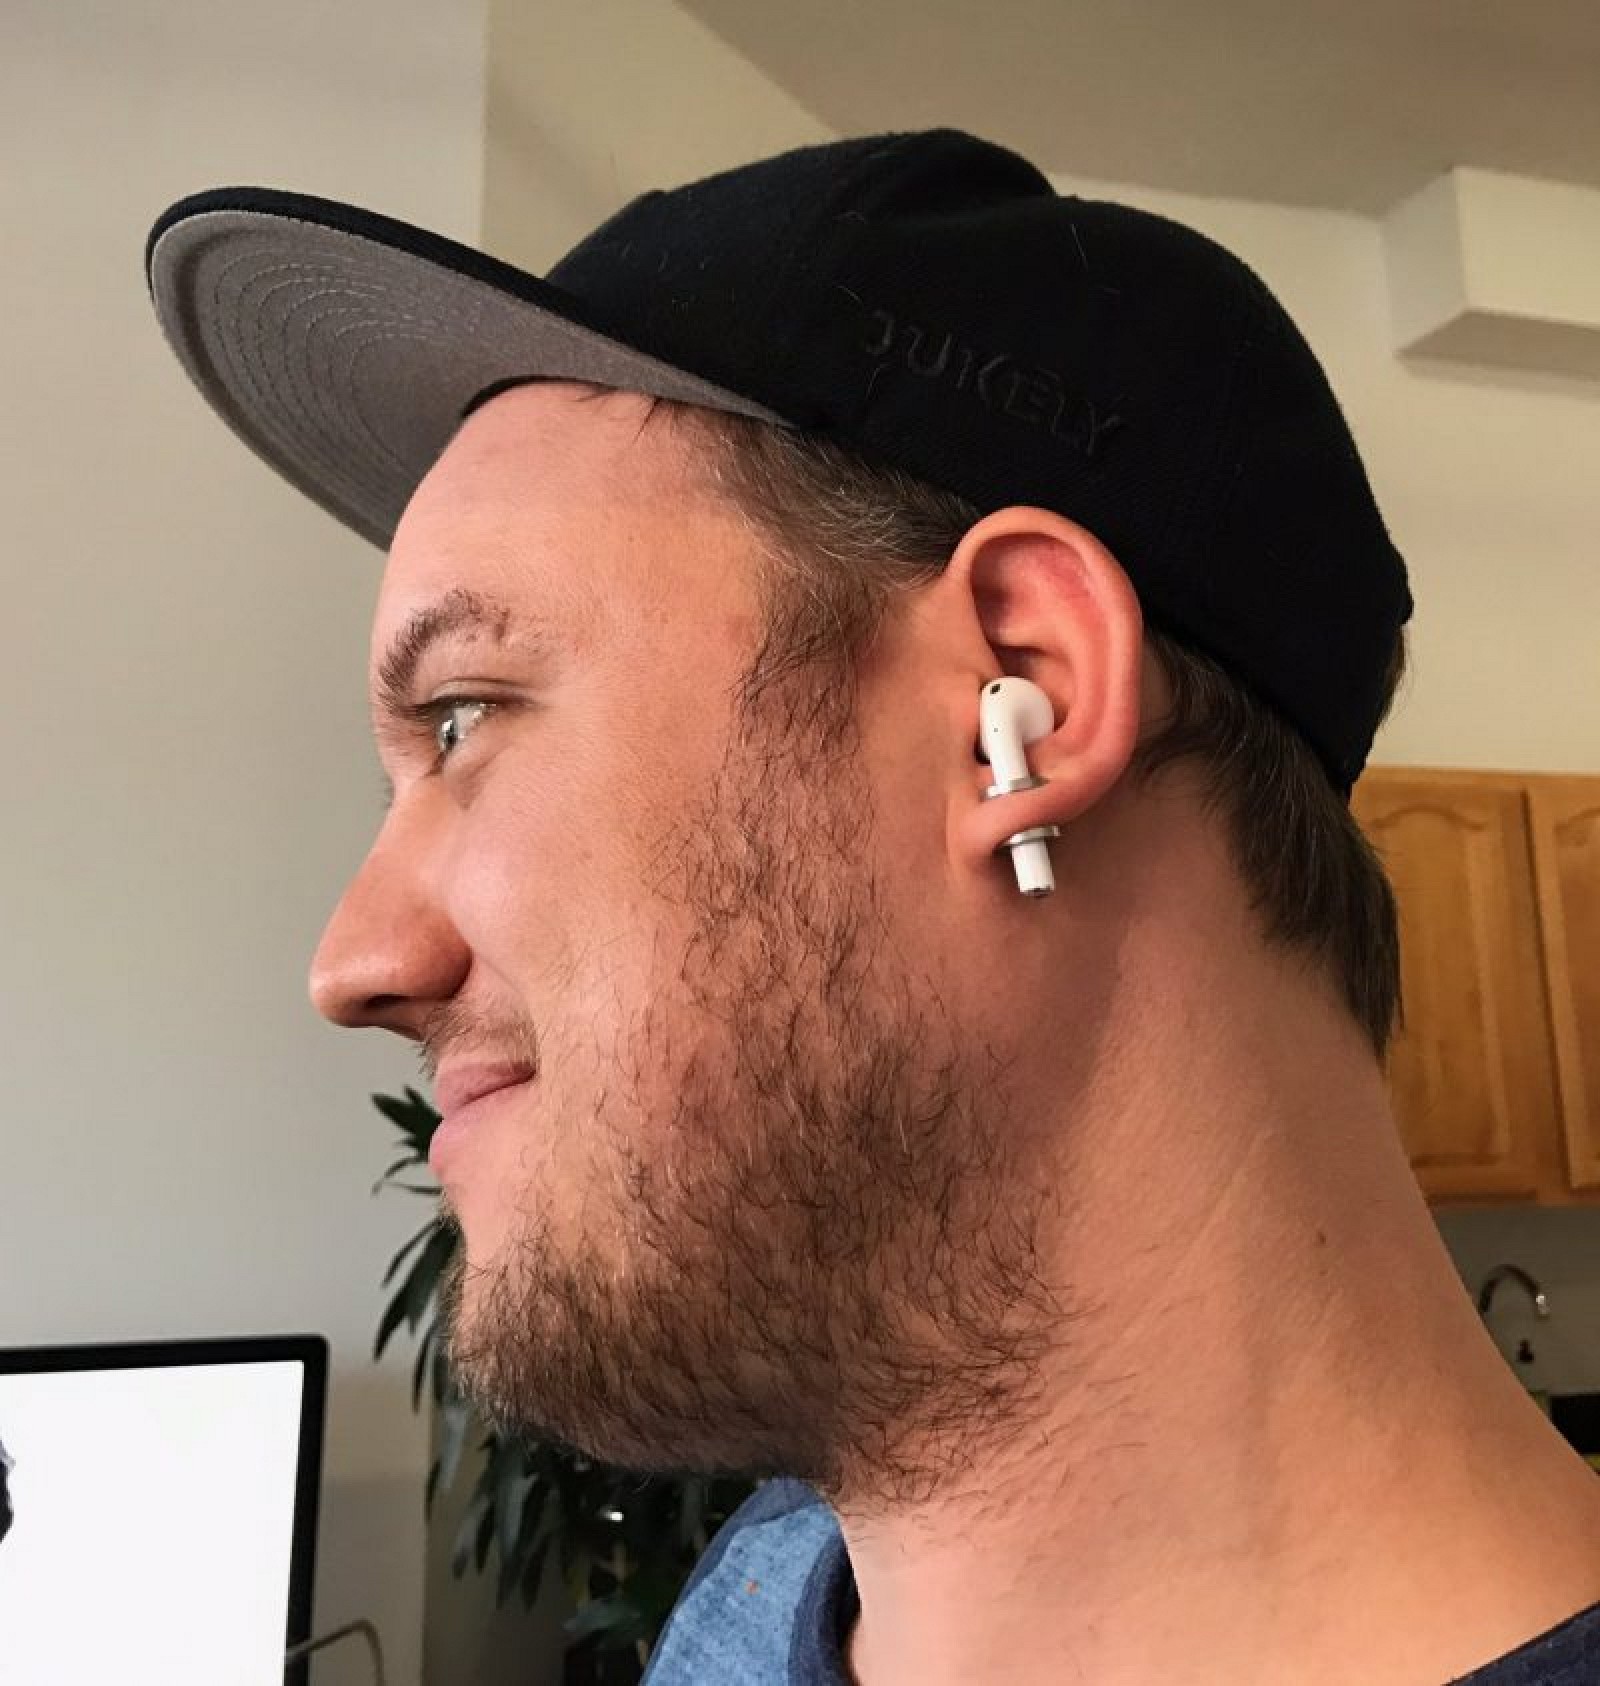 Man Turns to Body Modification to Keep AirPods Held in Place - Mac ...